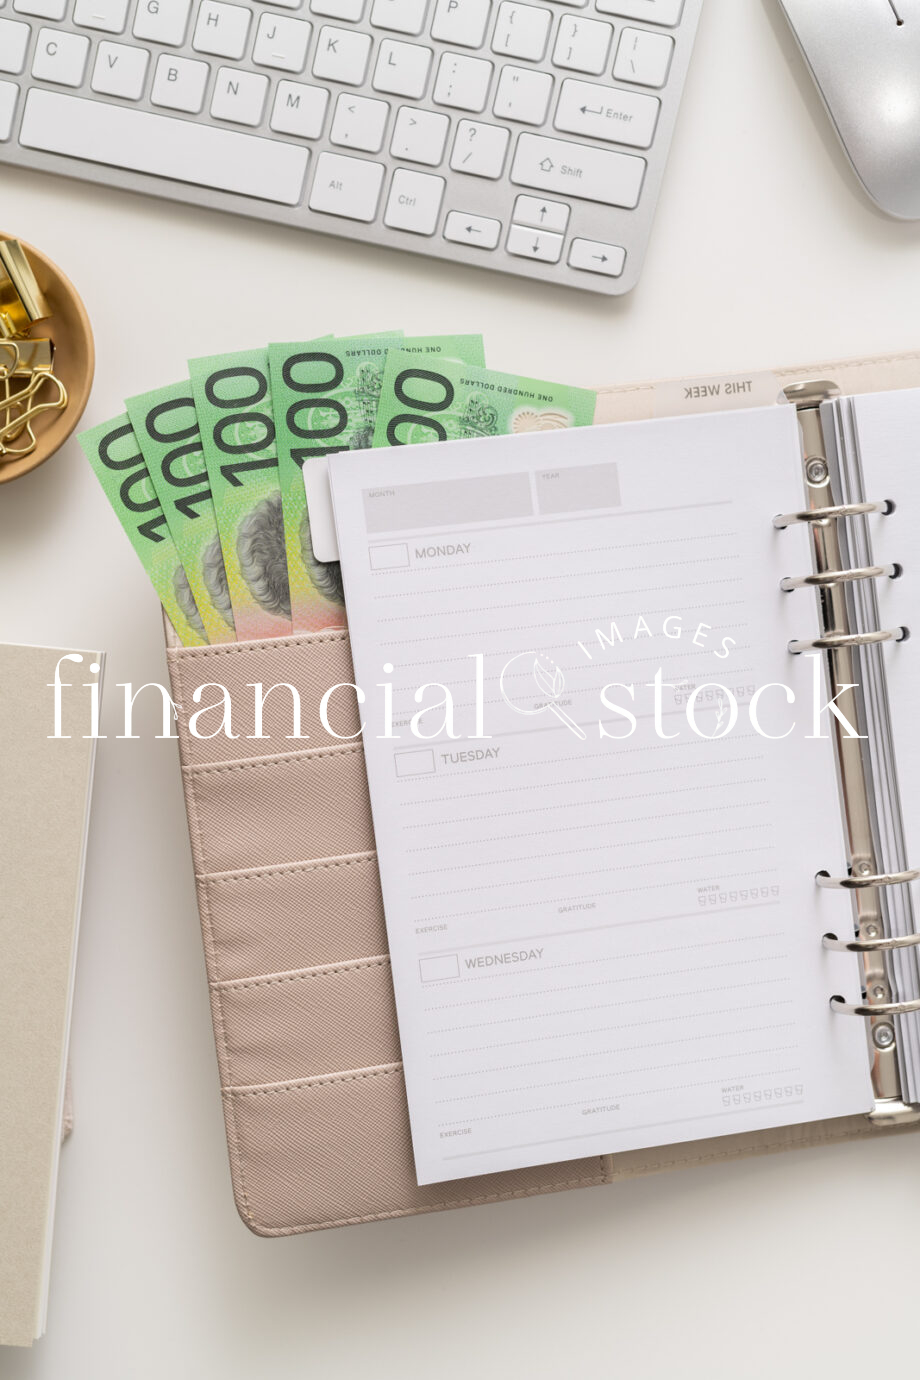 Financial Stock Images - Woman working from home with an office diary